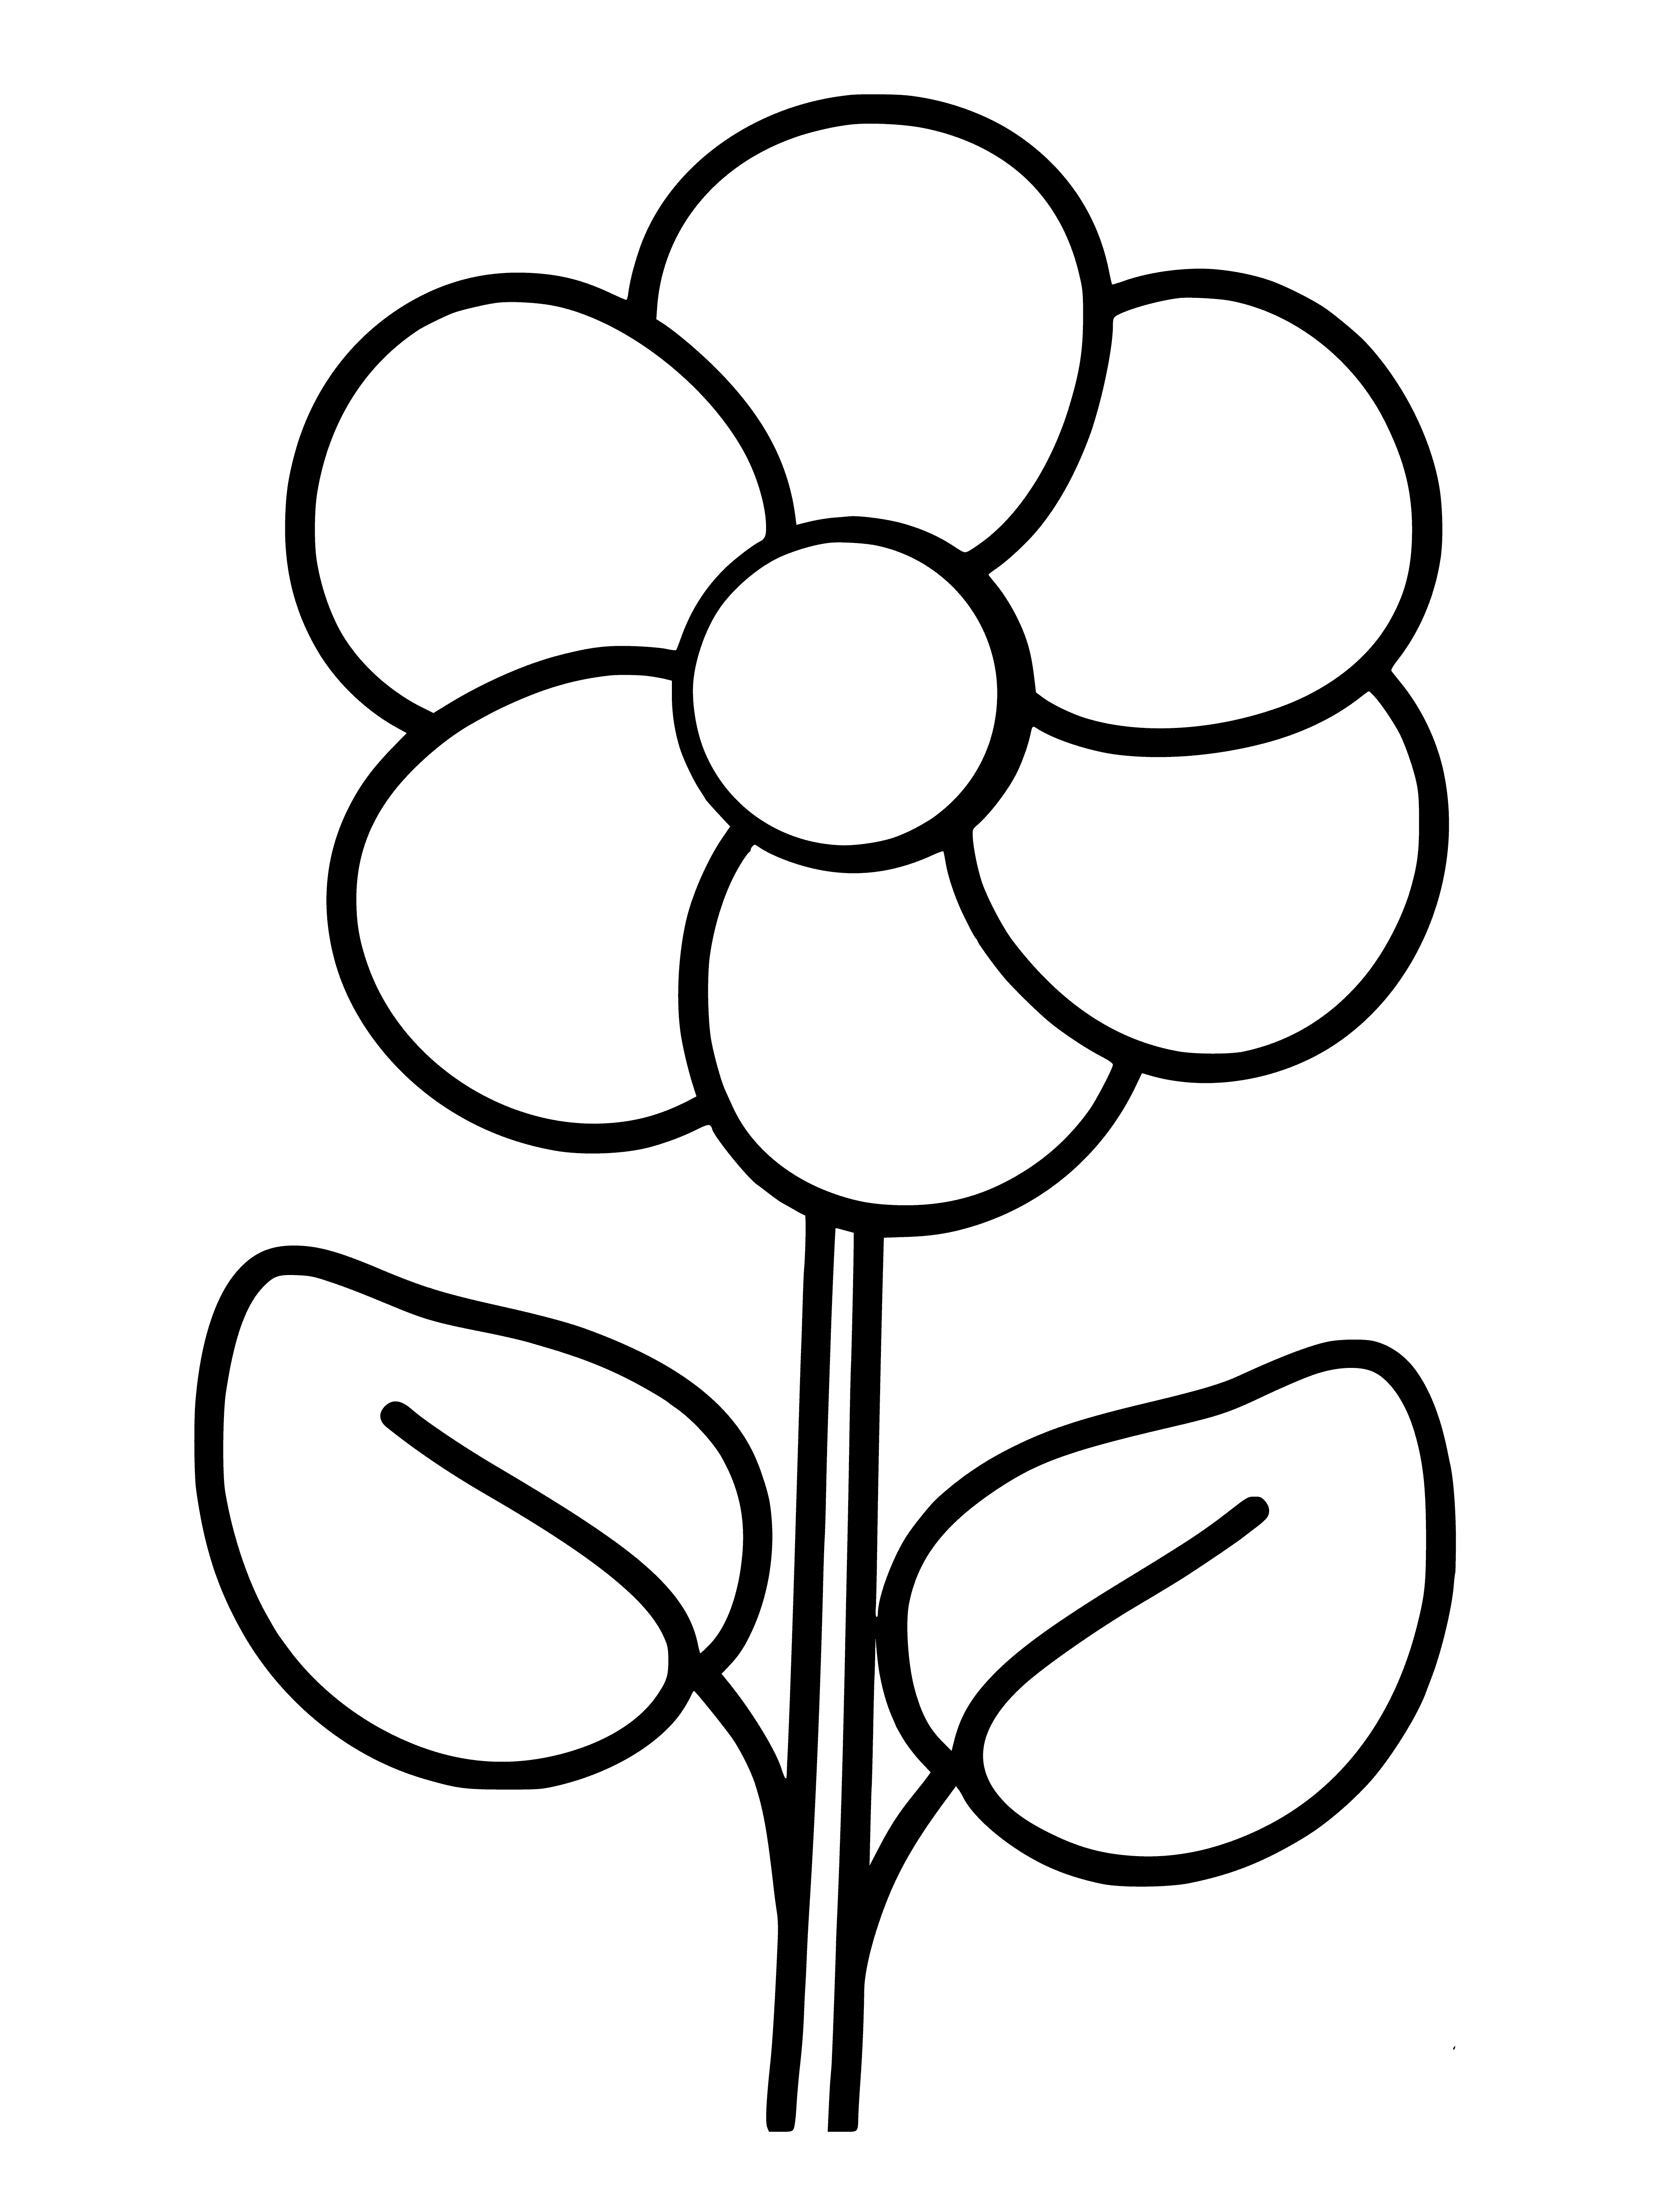 coloring page: A white flower w/ petals curling up, yellow center, &green leaves at the base.